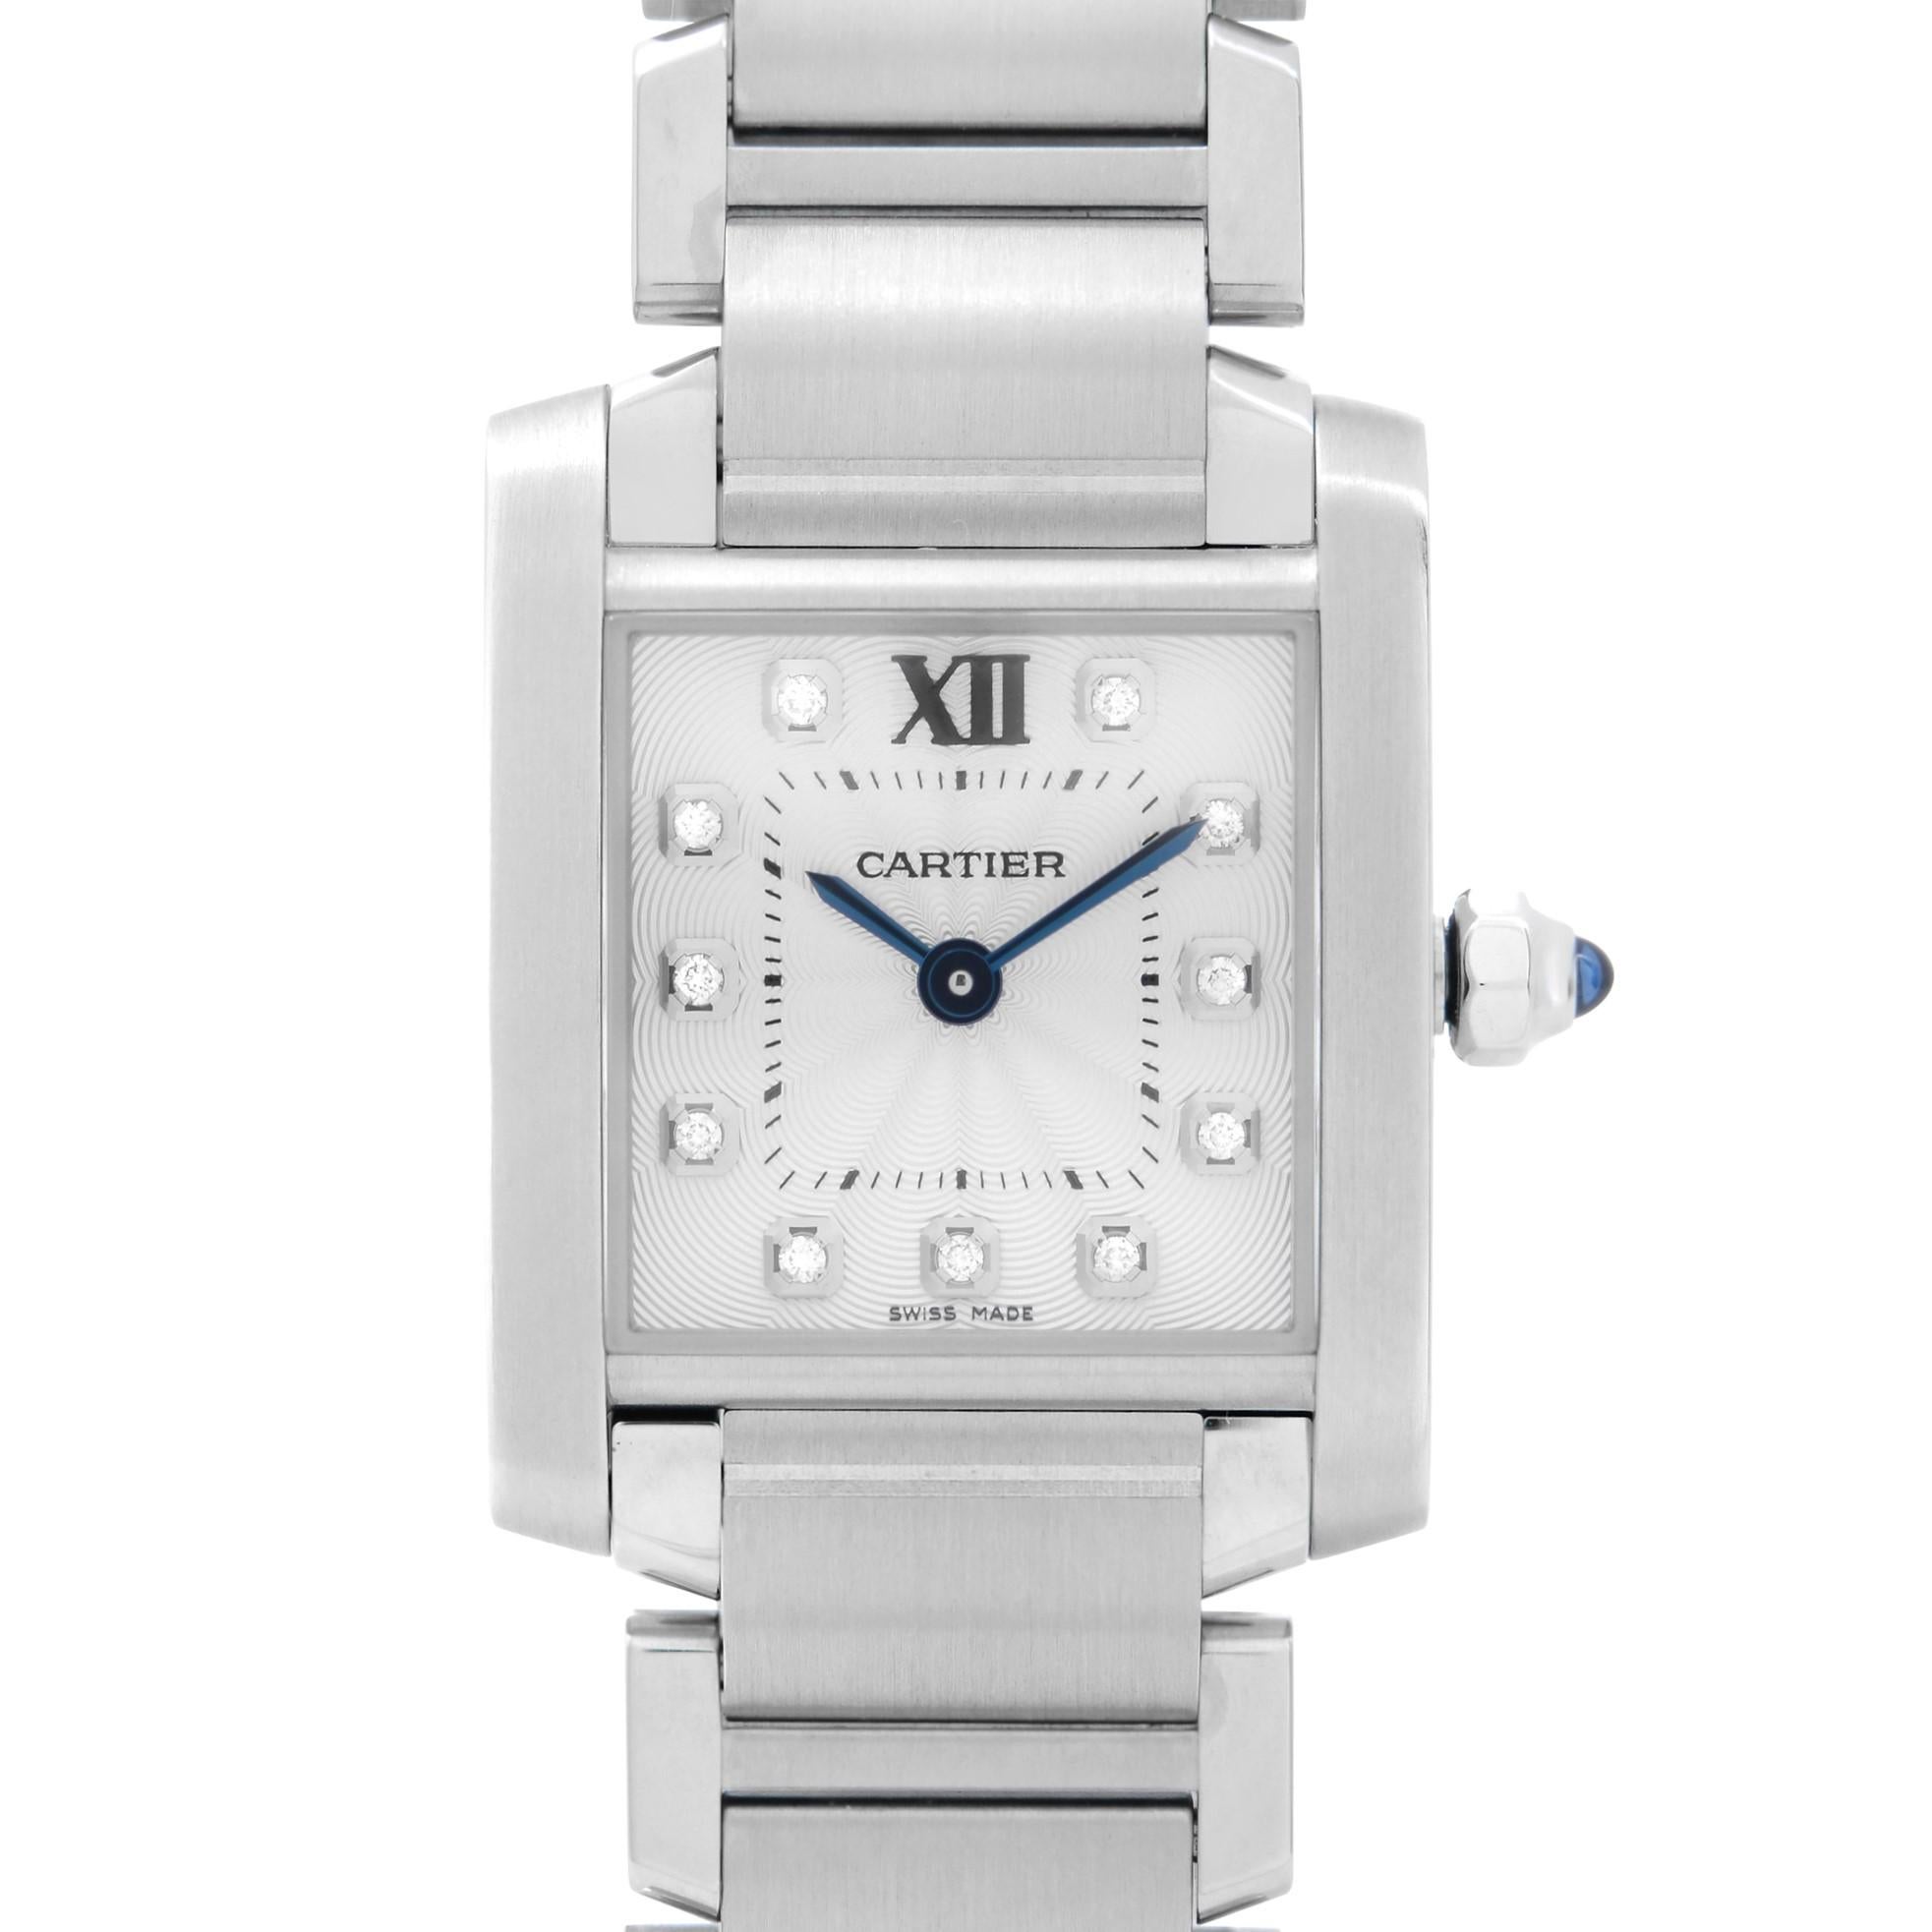 Store Display Model Cartier Tank Francaise Steel Silver Diamond Dial Quartz Ladies Watch WE110006. This Beautiful Timepiece Features: Stainless Steel Case and Bracelet, Fixed Stainless Steel Bezel, Silver Dial with Blue Hands, And Diamond Hour